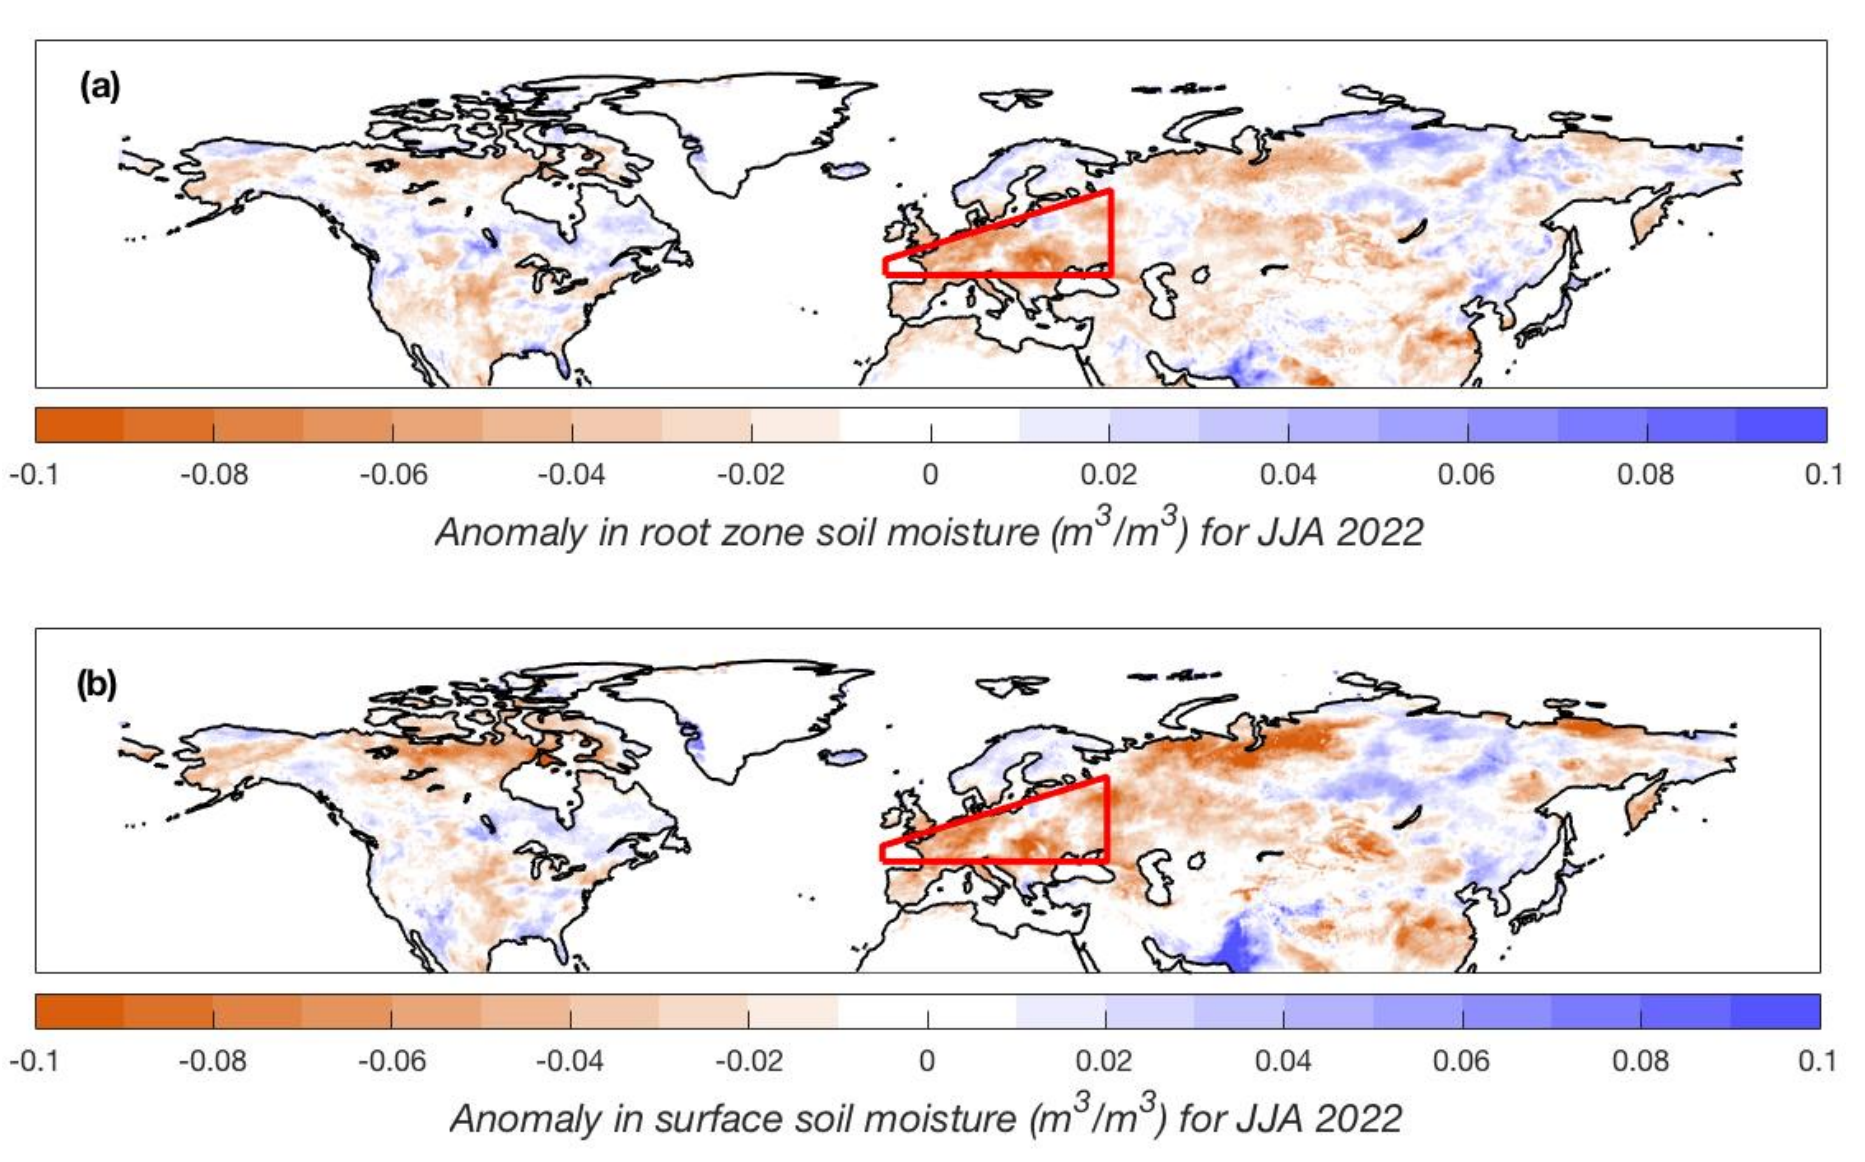 (a) Anomaly in the June to August average root zone soil moisture w.r.t 1950-2022 climate over the northern hemisphere so-called ‘extratropics’ (NHET) region (full domain shown) based on the ERA5-Land dataset. The smaller region West-Central Europe (WCE) is highlighted by the red box. (b) same as (a) for surface soil moisture. Graphic: World Weather Attribution